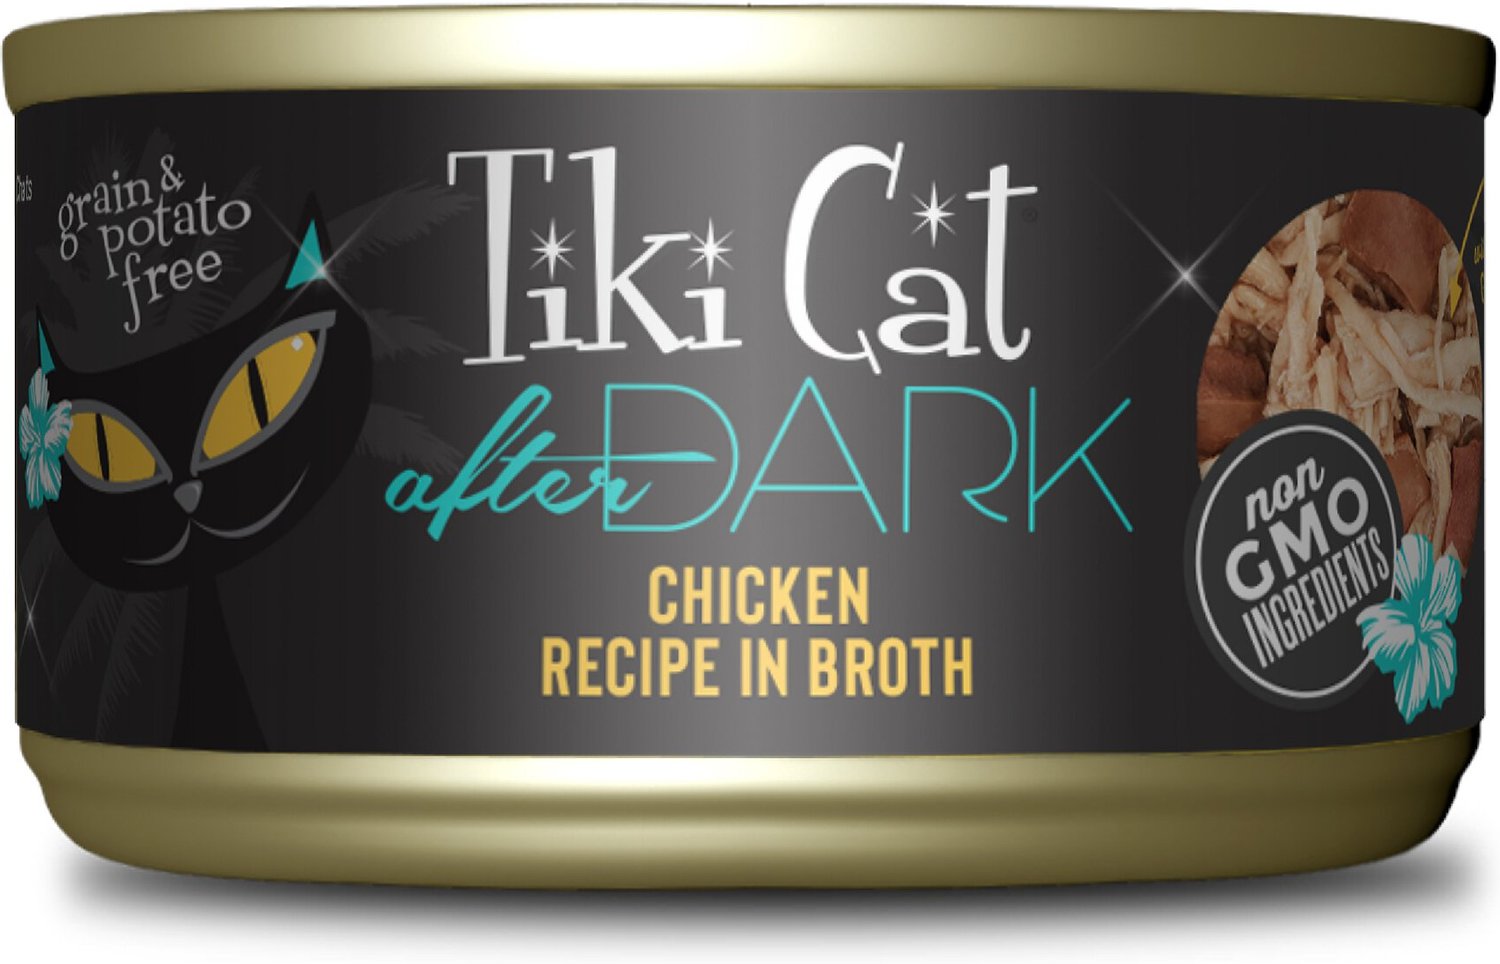 Tiki Cat After Dark Chicken Canned Cat Food, 2.8oz, case of 12